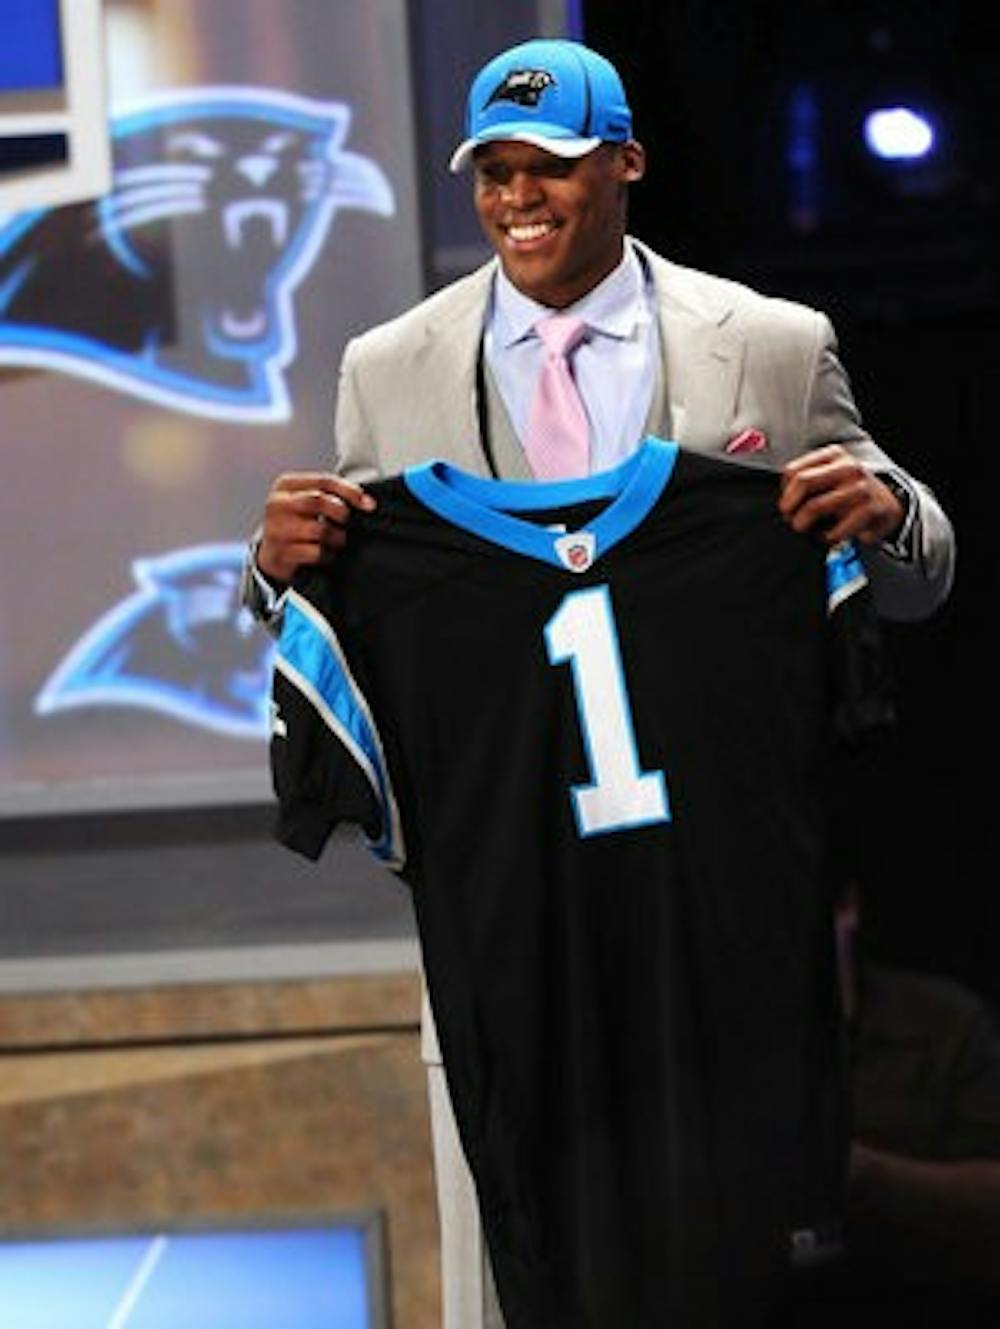 Auburn's Cam Newton poses with a Carolina Pathers jersey after being the number one selection in the 2011 NFL Draft. (Todd Van Emst / Auburn Media Relations)